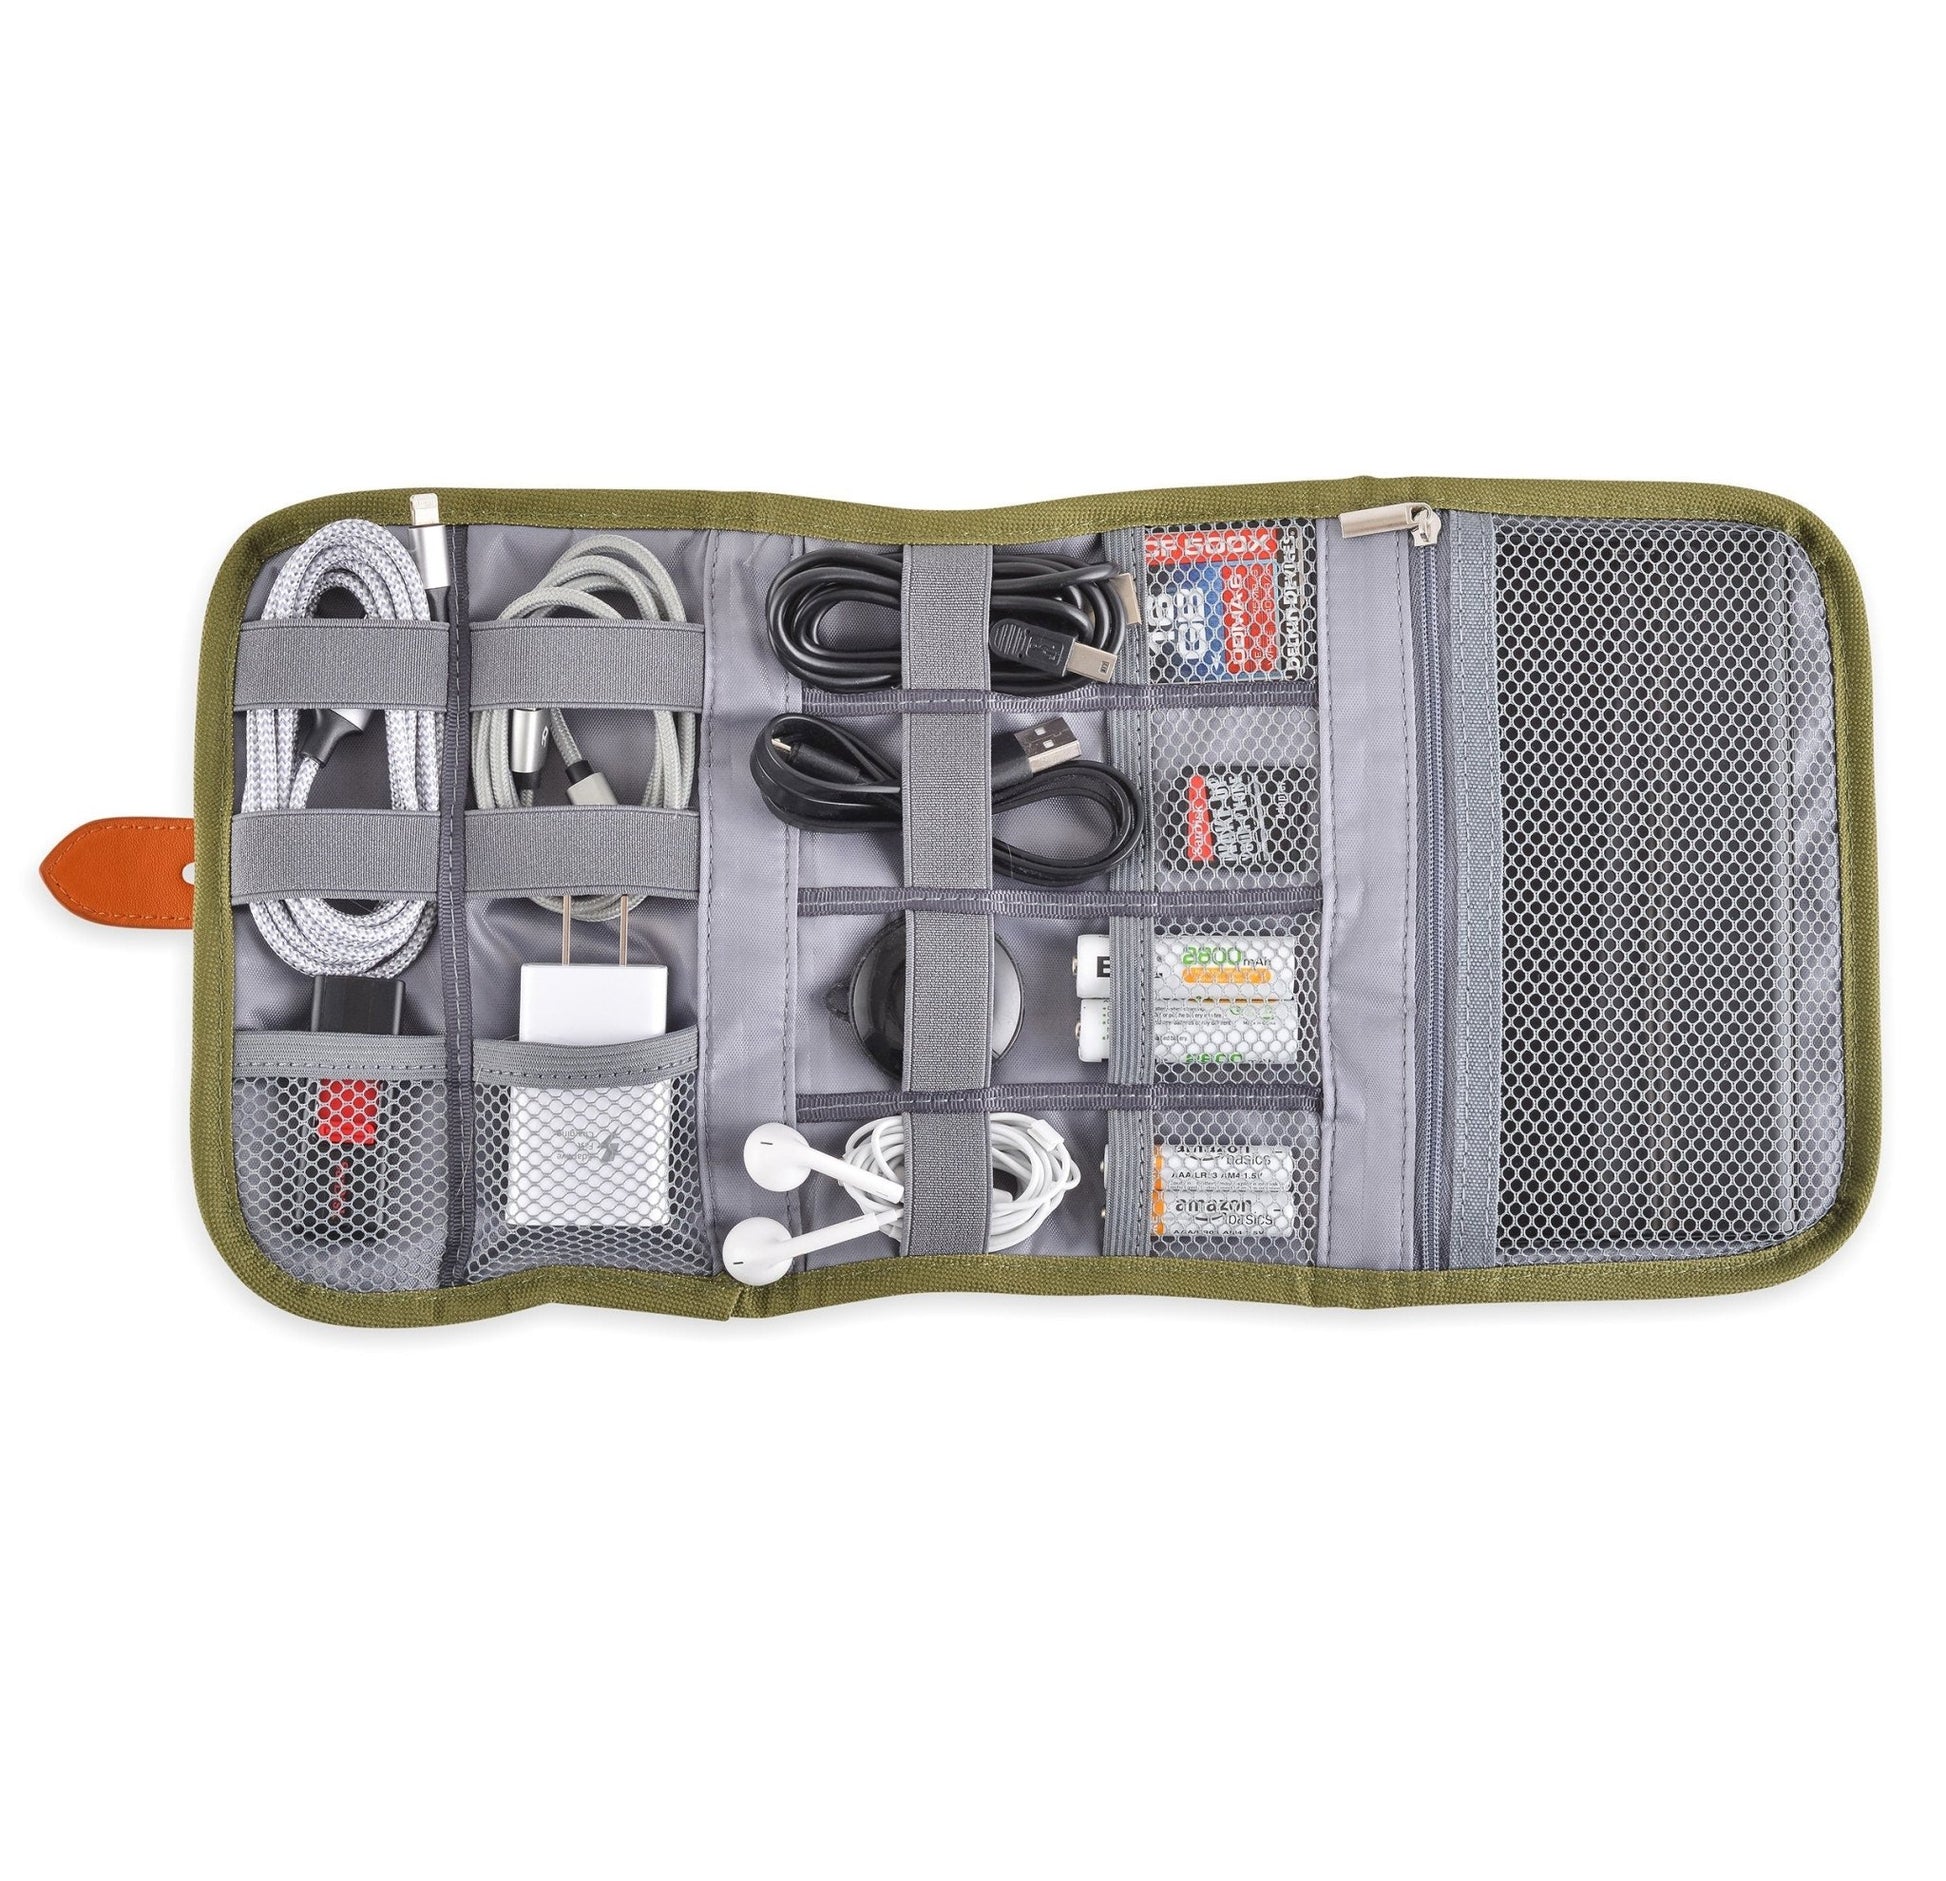 Olive Electronics Organizer Bag – Portable Travel Accessories Case for Chargers, Cords, Cables, Batteries and More!